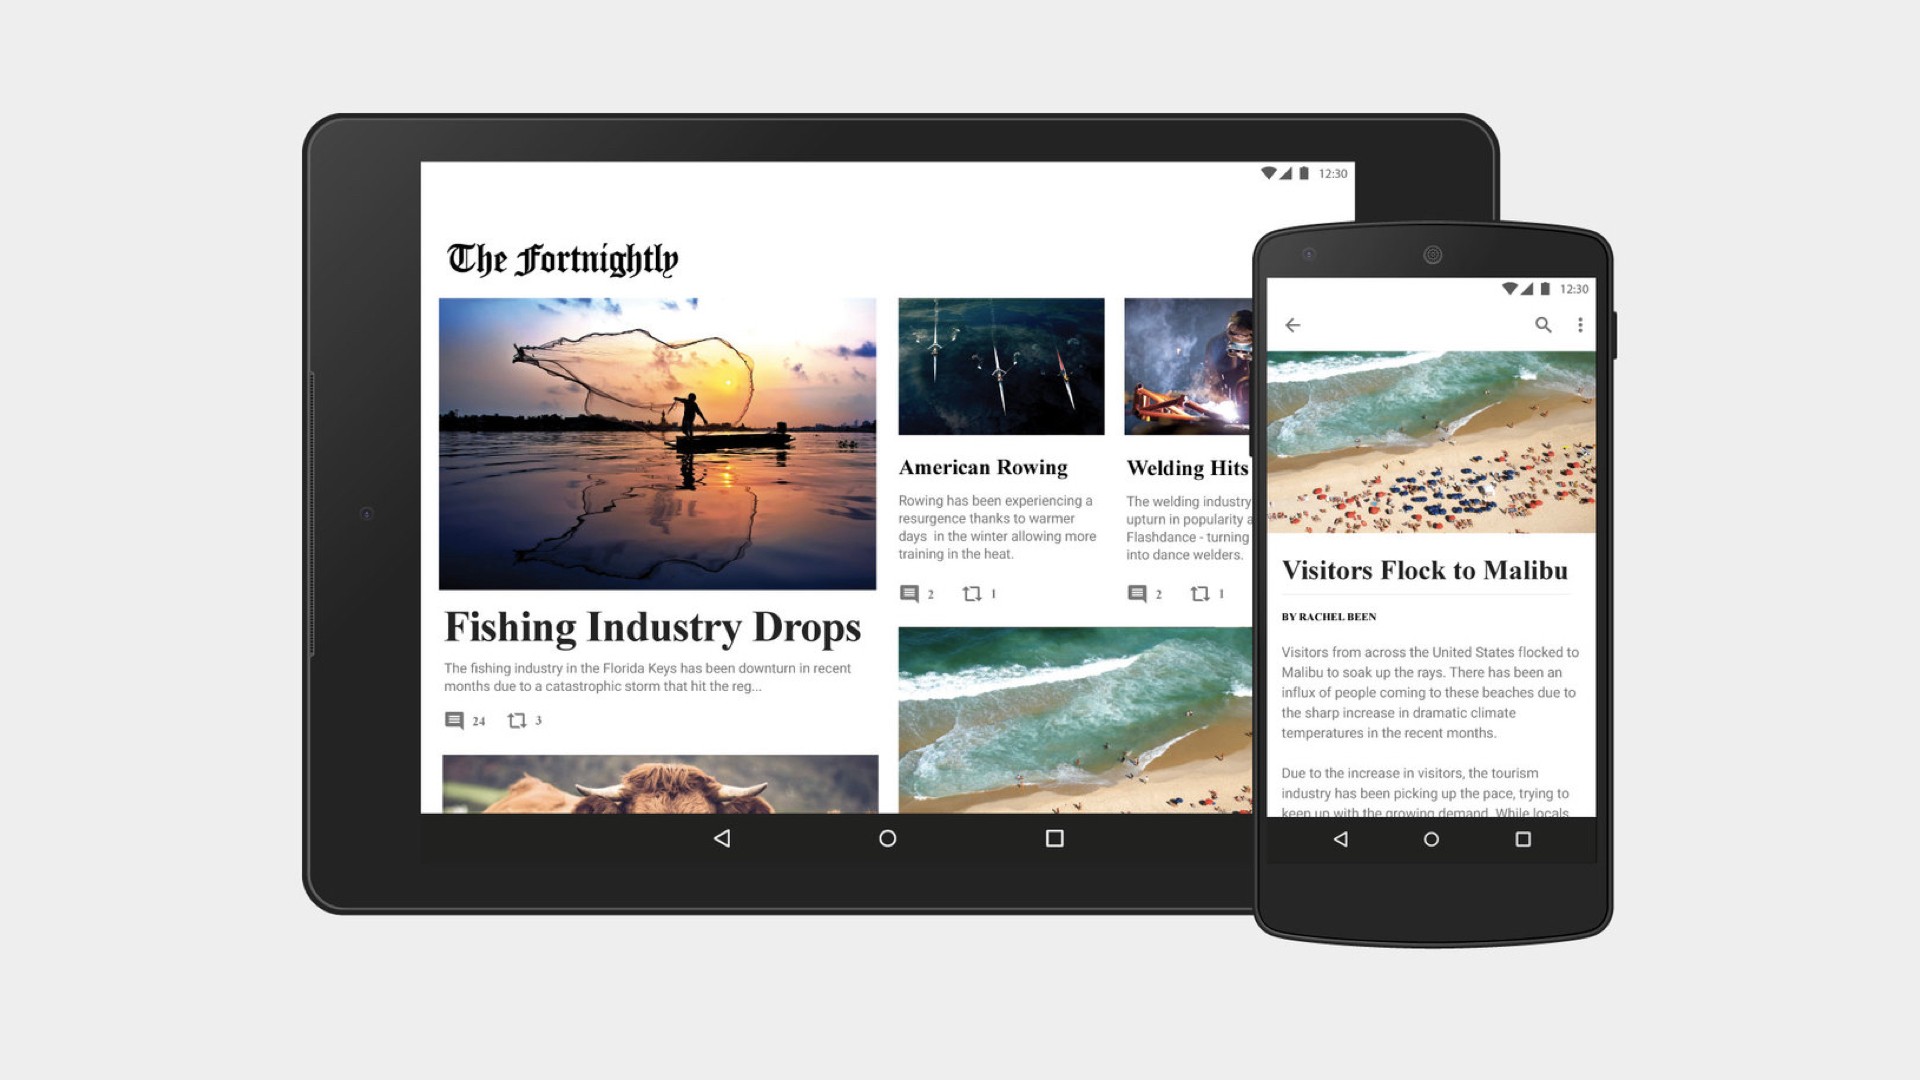 Phone and tablet views for news article apps that doesn't look like Material Design's identity.